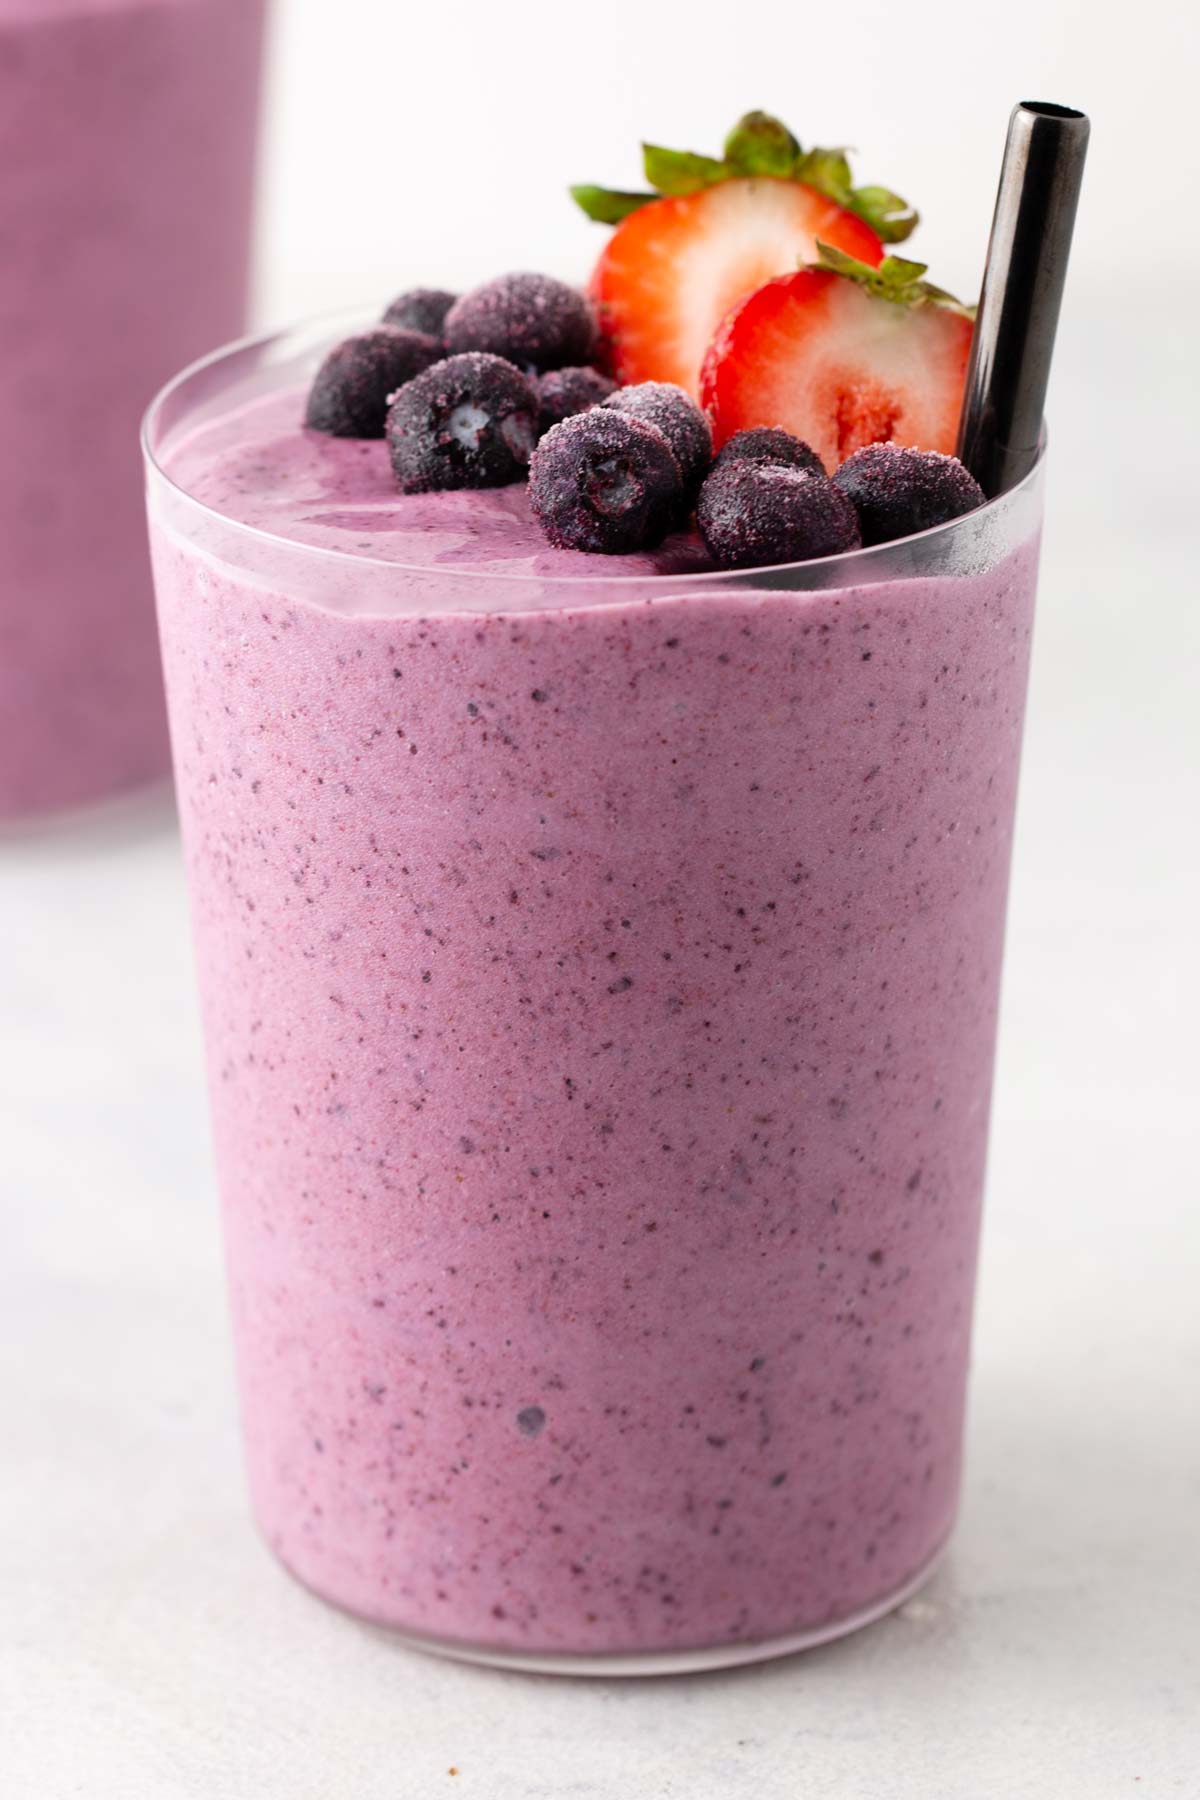 Strawberry blueberry smoothie in a glass.